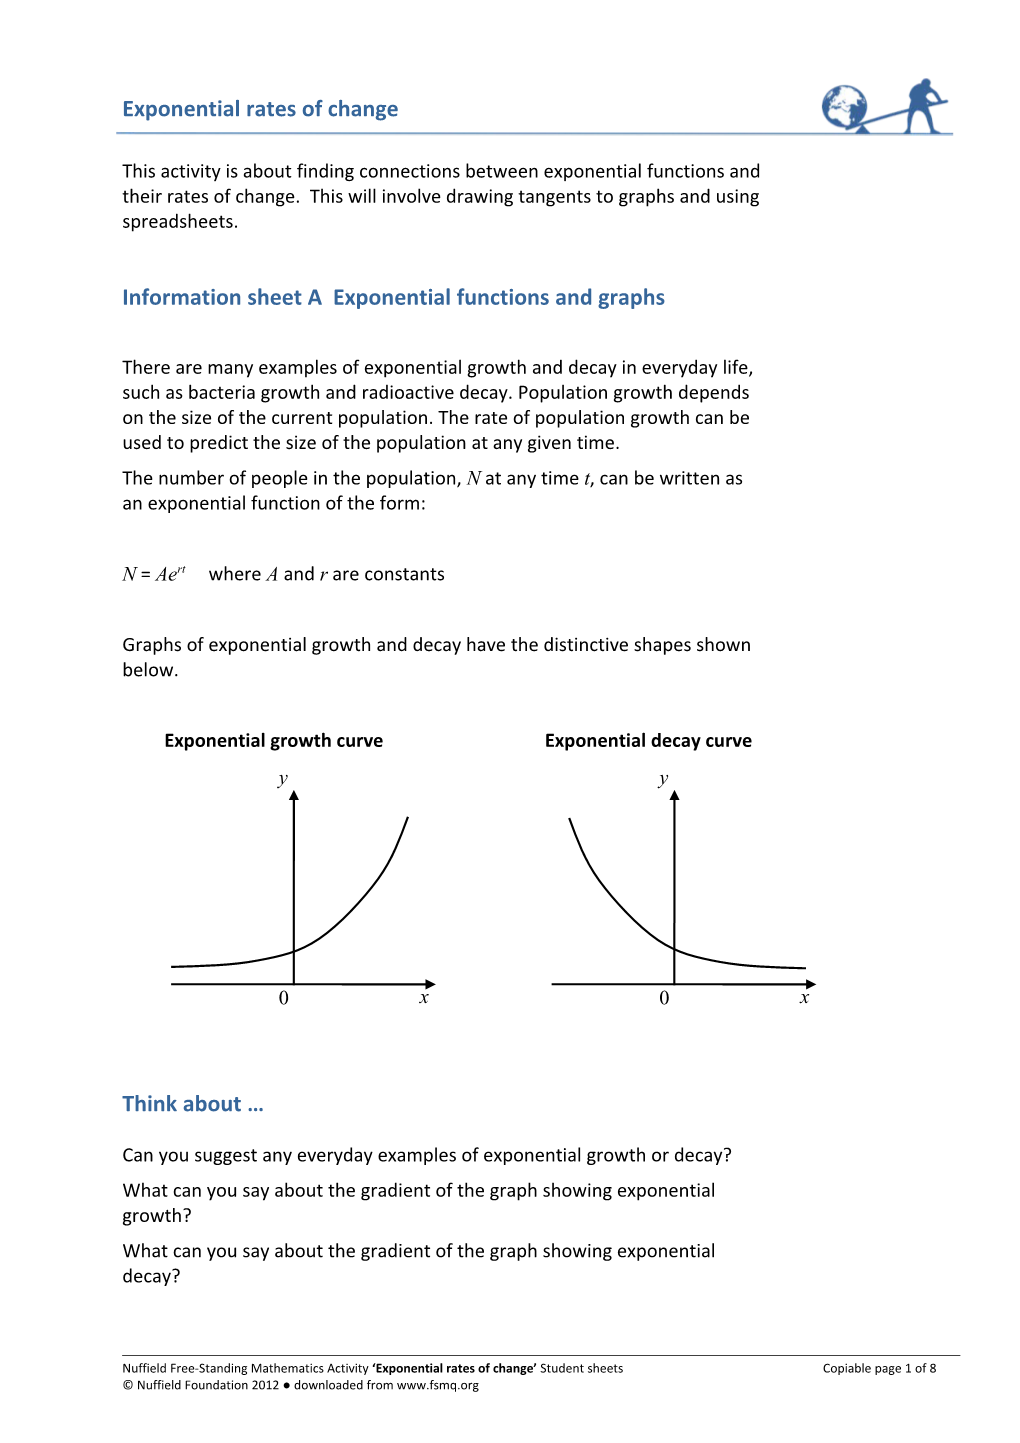 Information Sheeta Exponential Functions and Graphs